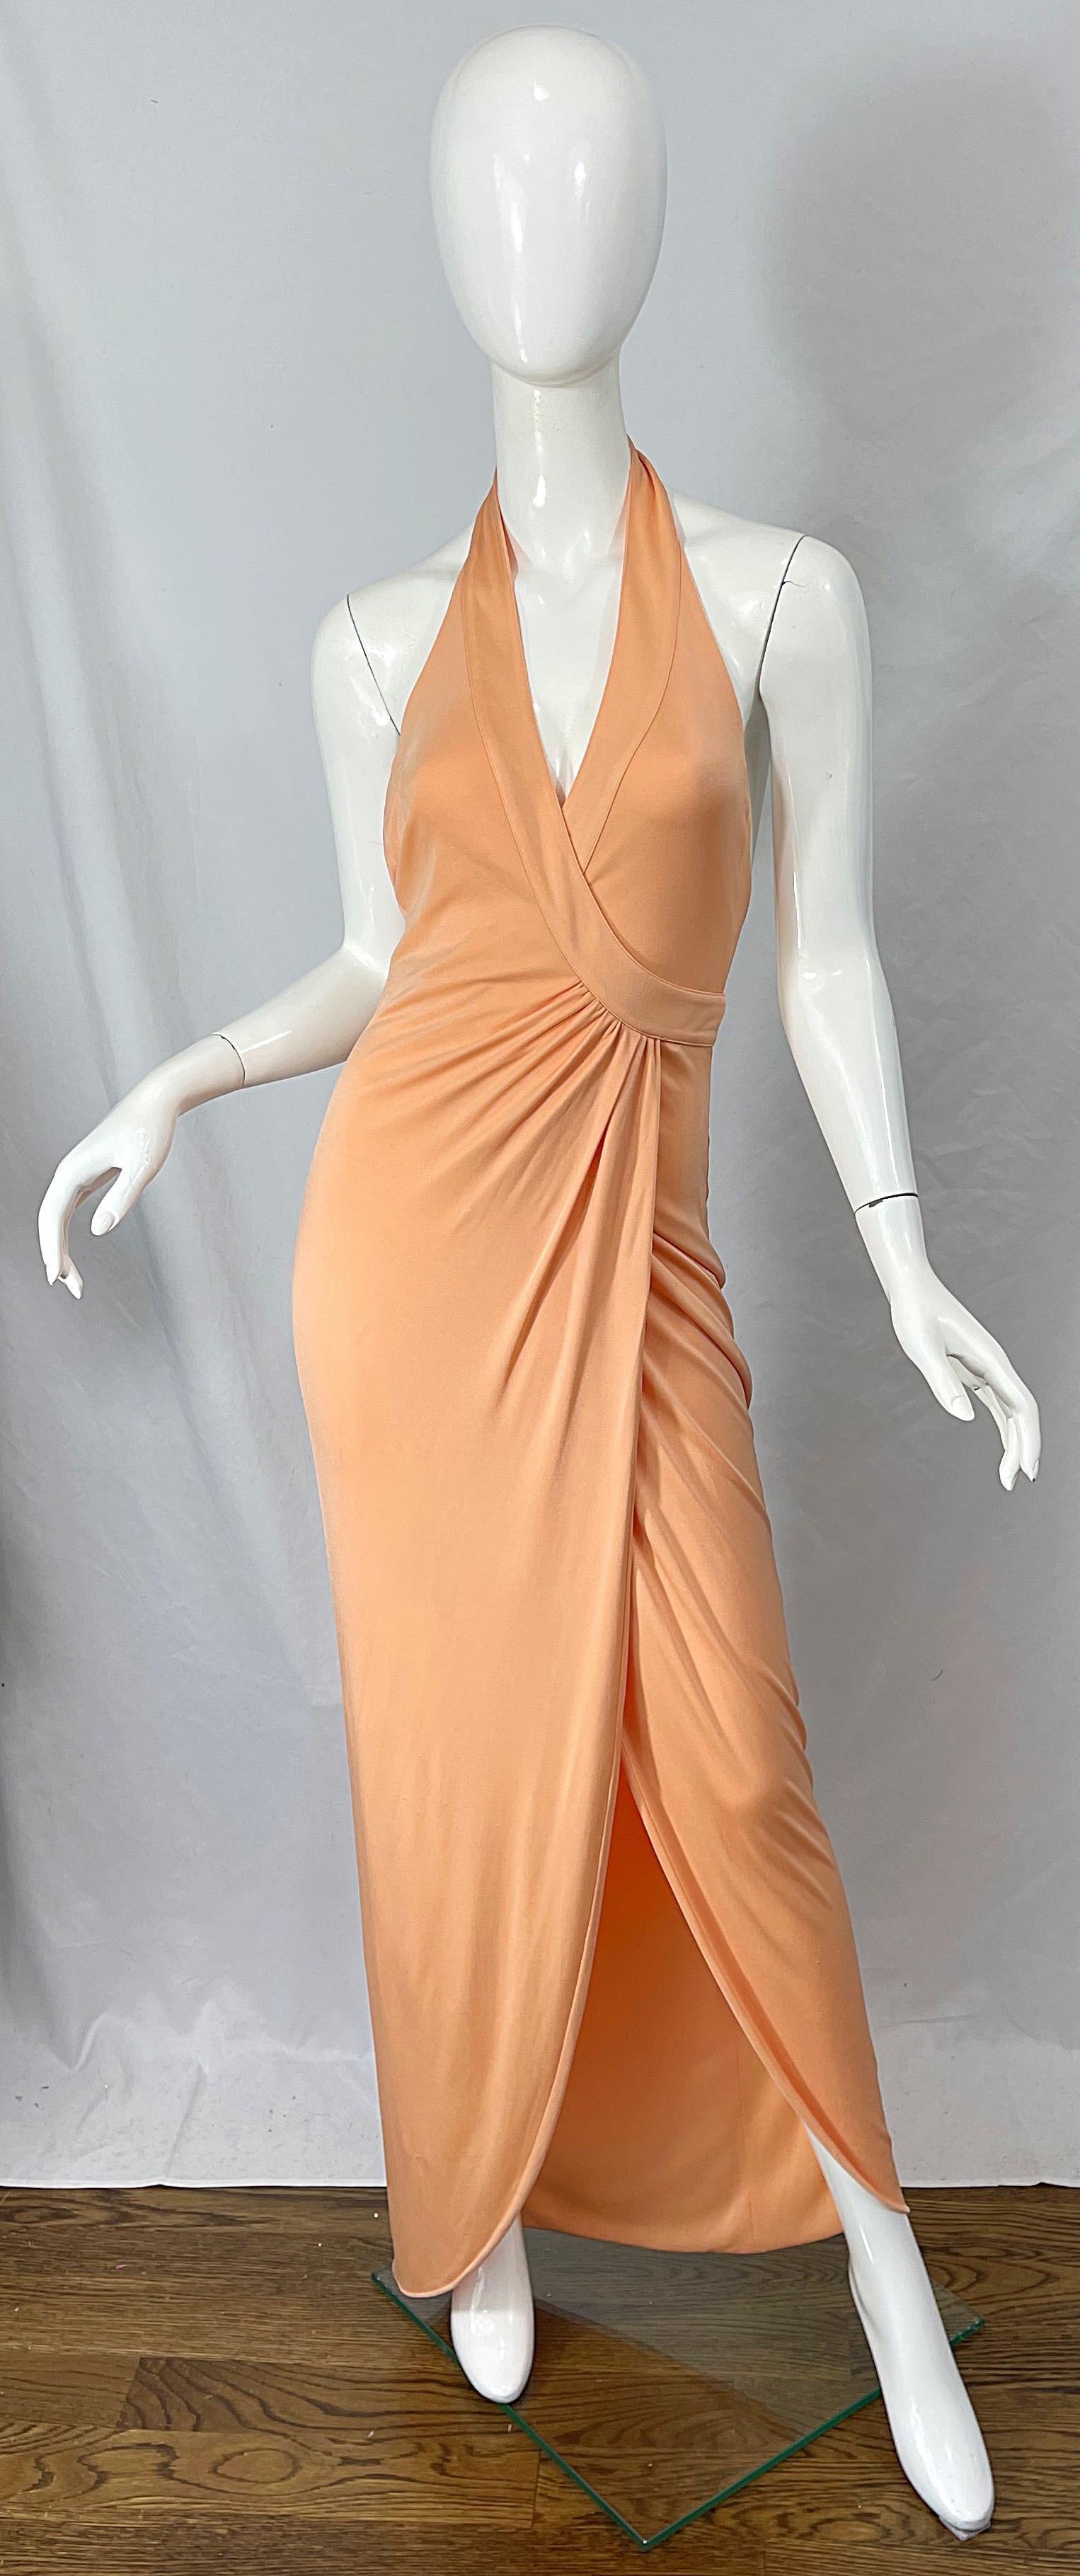 Sexy GIANNI VERSACE Spring / Summer 2005 peach / salmon silk jersey runway halter gown! Unique flattering wrap style. Gold metal Medusa medallion at center back detaches with hidden snaps for waist straps to wrap around. Slit reveals just the right